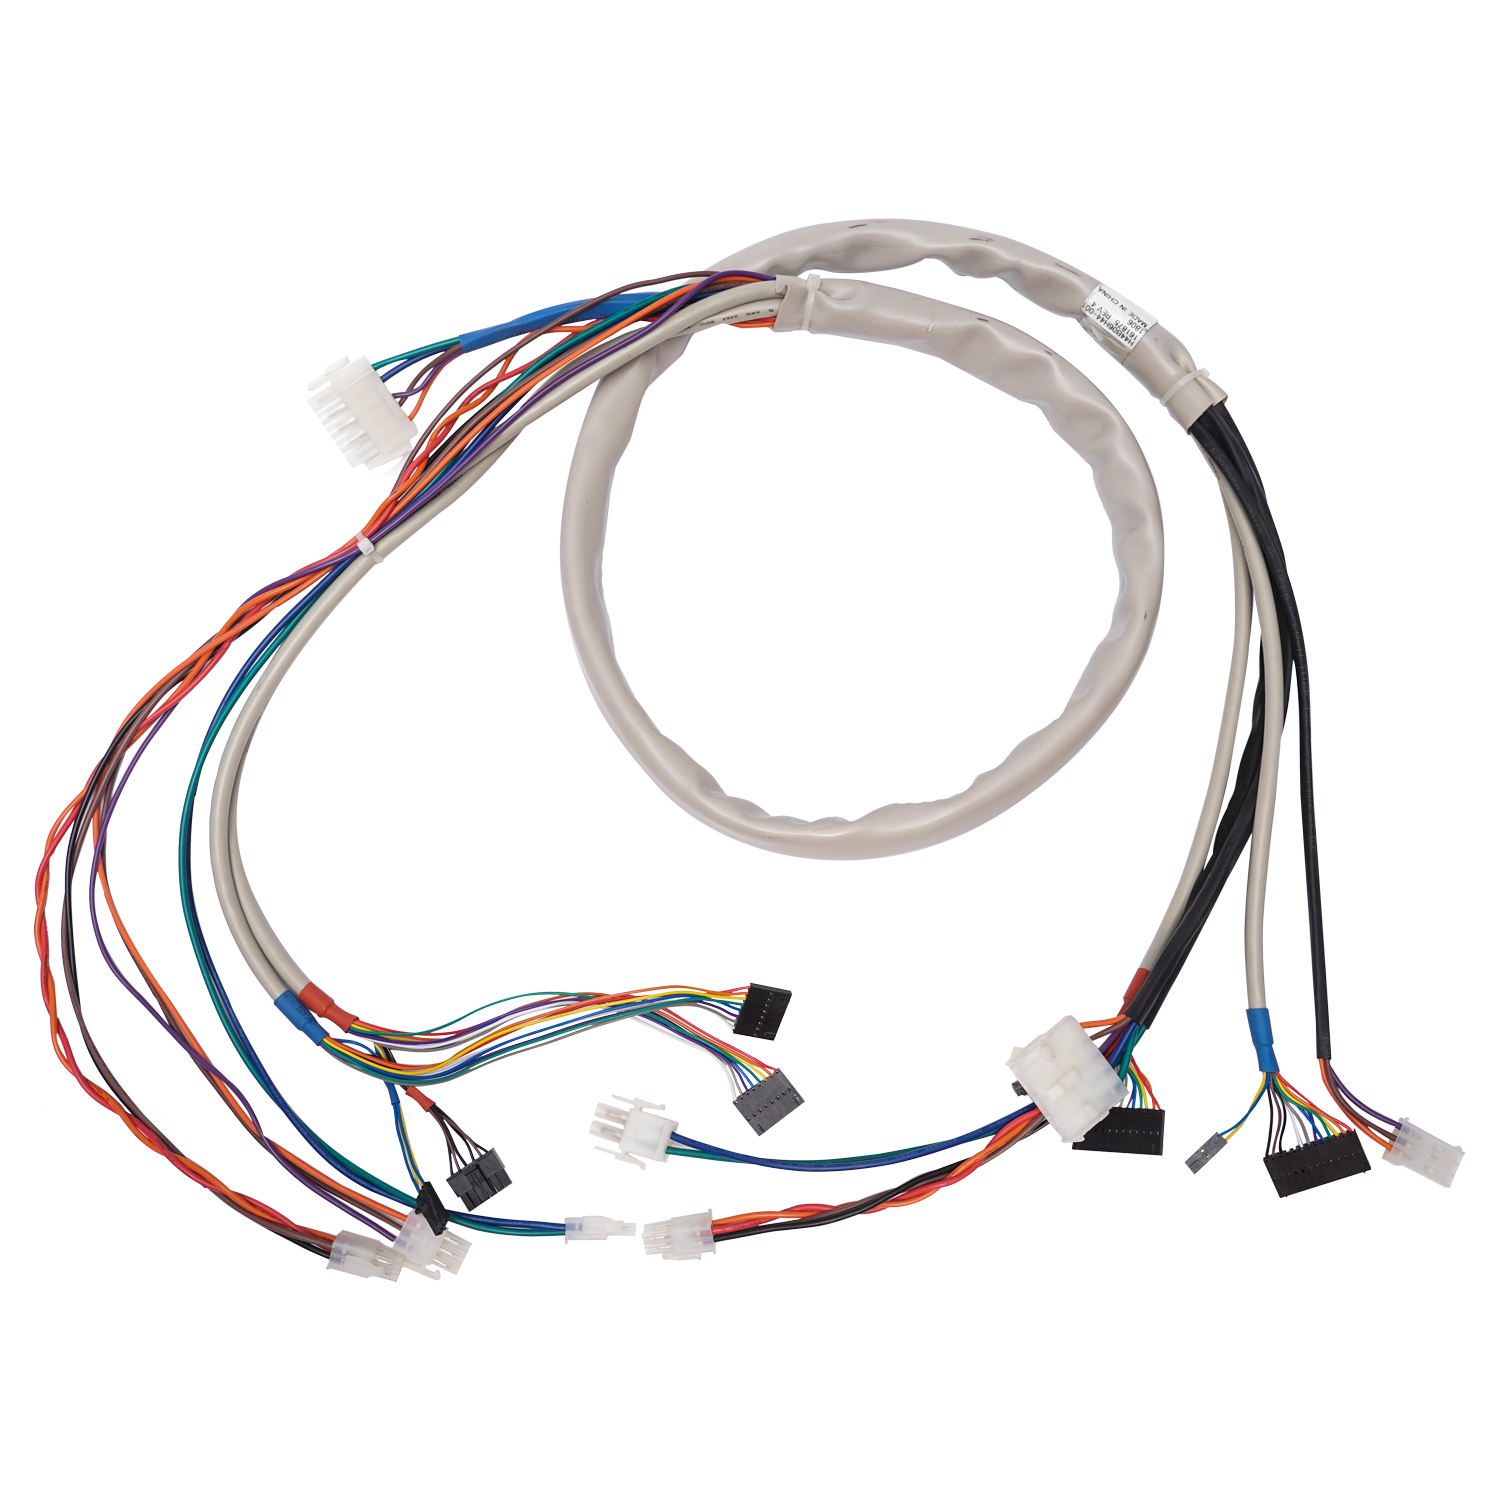 Molex Connector Electrical OEM Medical Wiring Harness